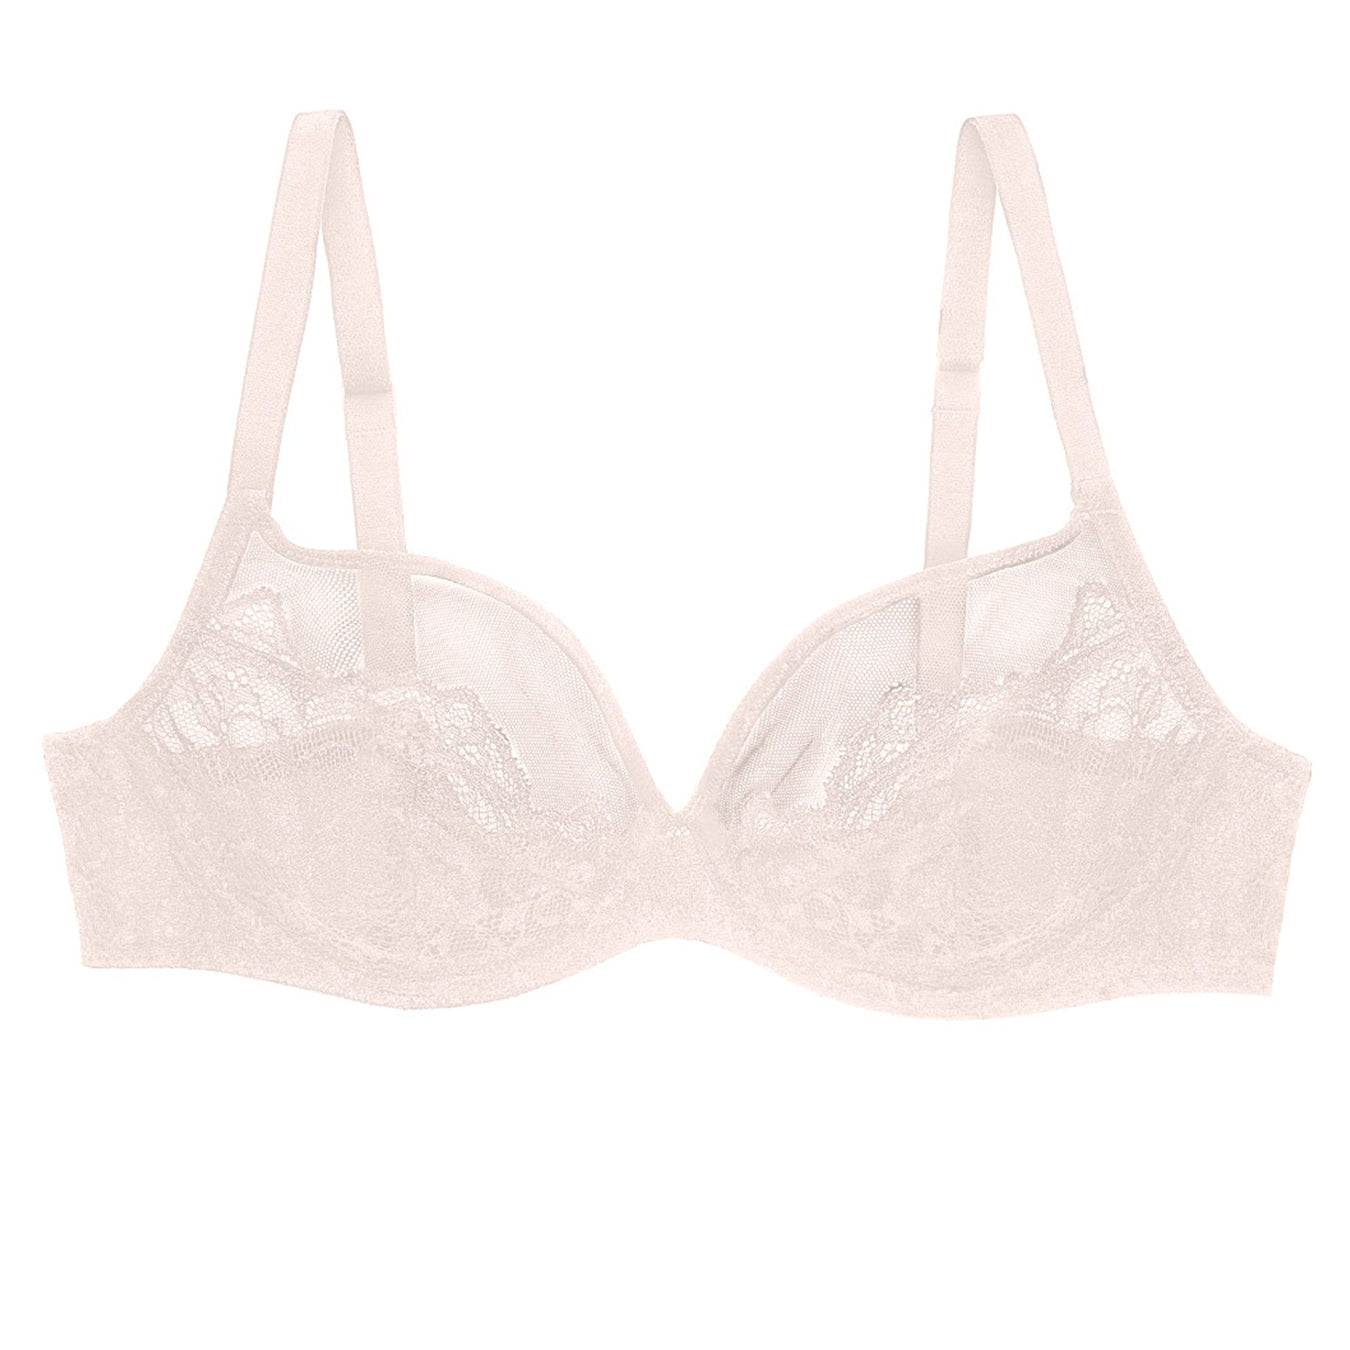 Bowery Mesh Plunge Bra
Adorned, Not Altered.
Made with breathable mesh and delicate lace accents, the Bowery Mesh Plunge Bra provides lift and support ideal for low cut tops. This bra adoBowery Mesh Plunge Bra